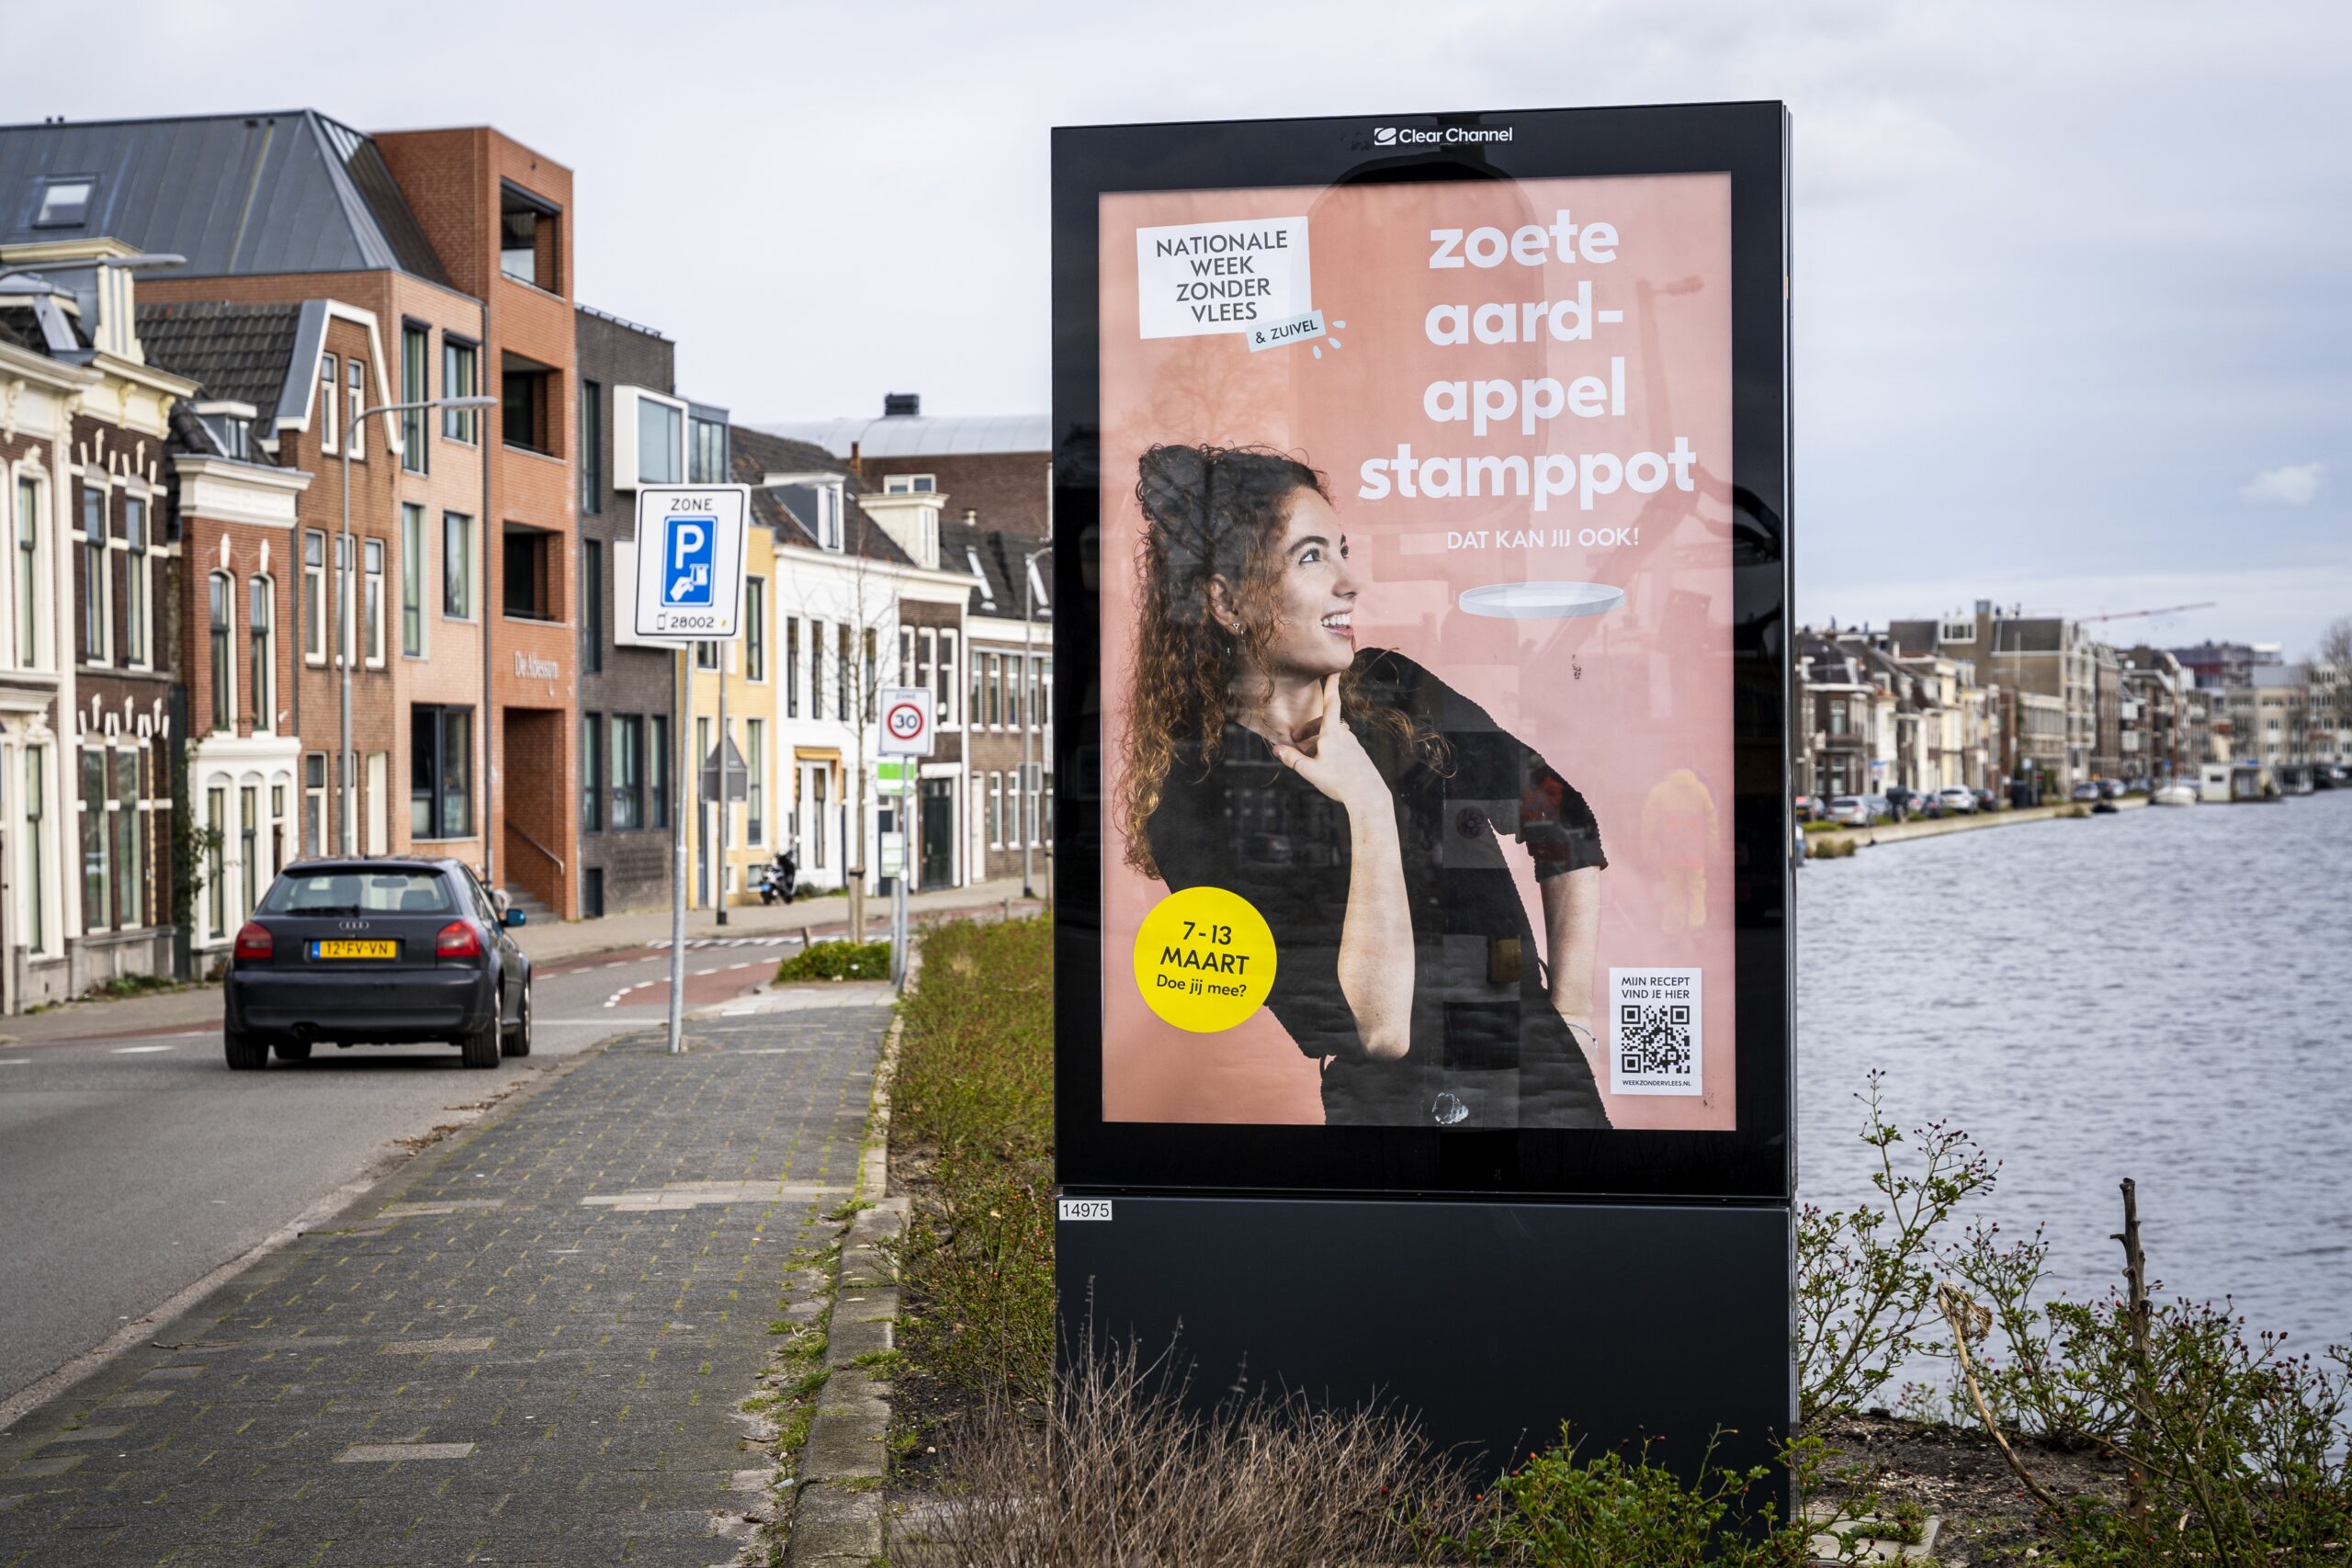 Utrecht joins move to ban adverts for meat from bus stops - DutchNews.nl